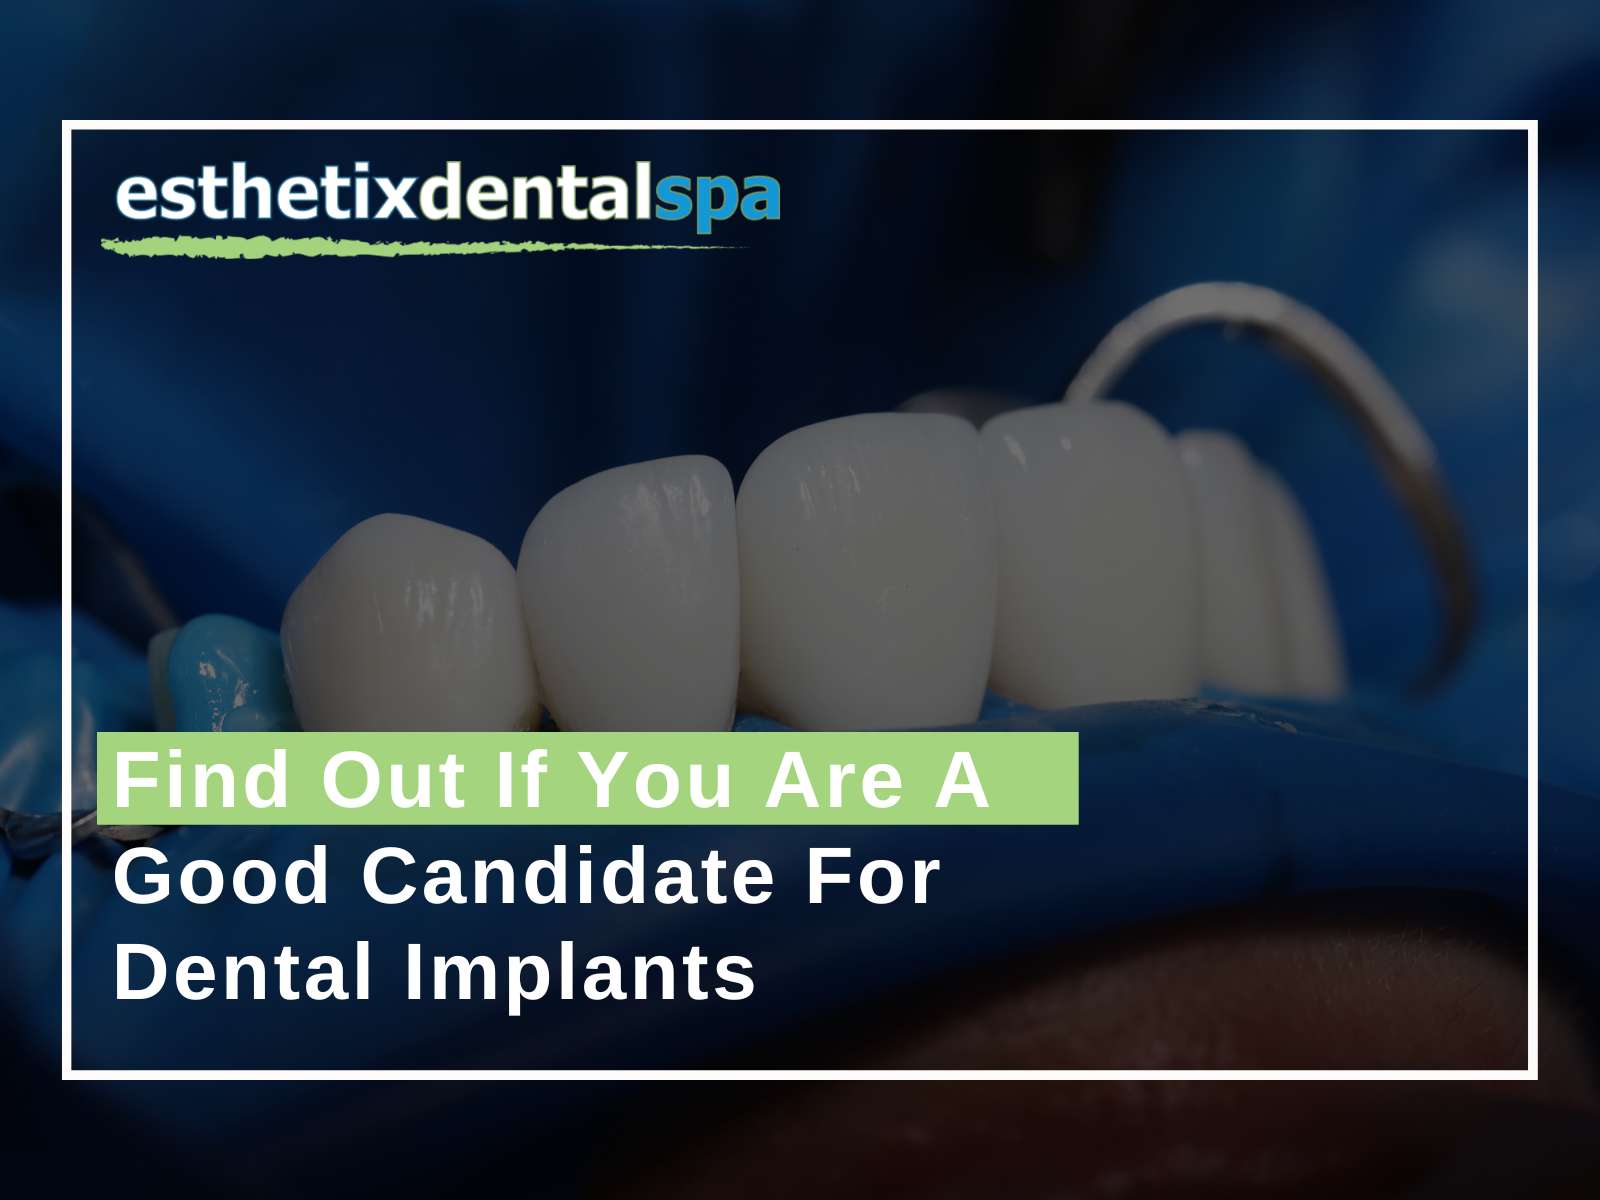 Find Out If You Are A Good Candidate For Dental Implants